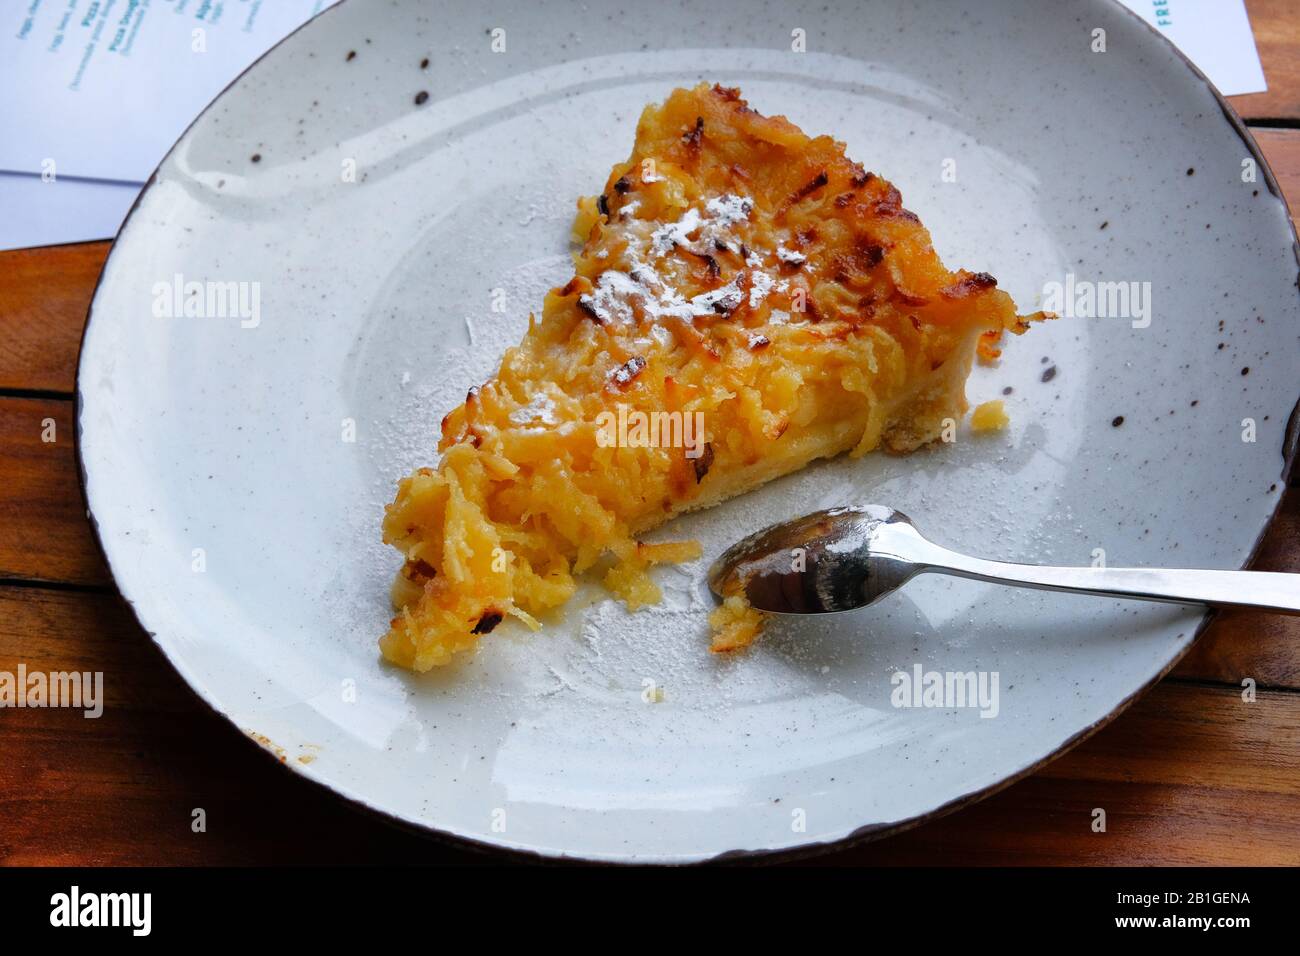 Slice of delicious baked apple open pie on porcelain plate, closeup. Stock Photo